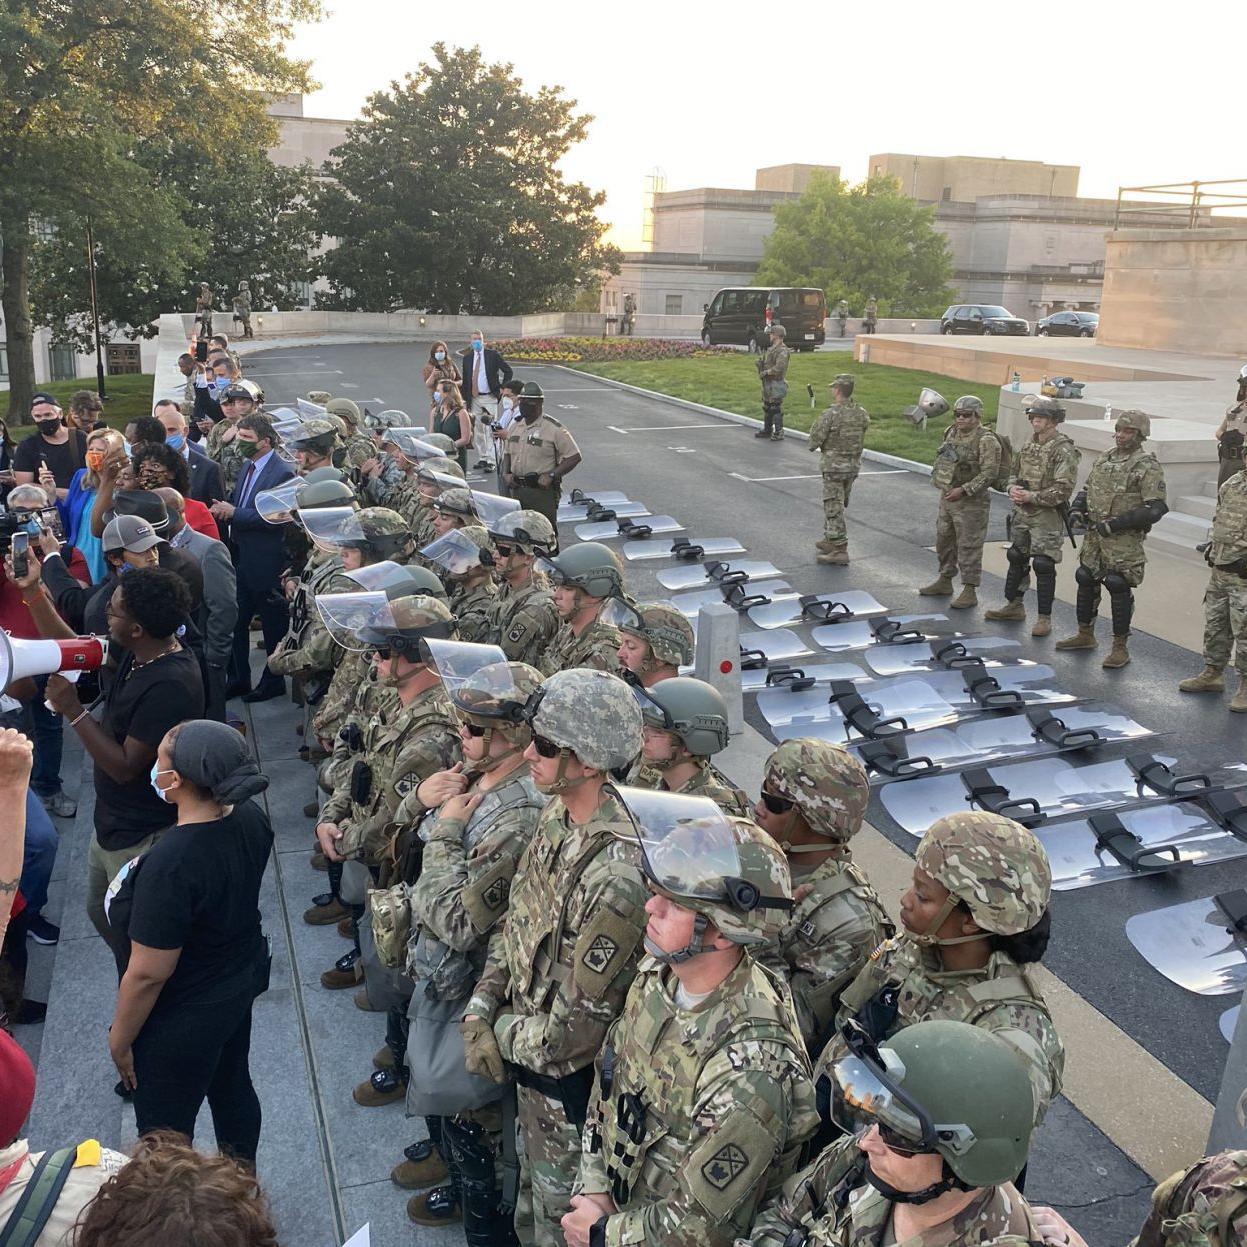 Nashville Tennessee National Guard laying down their gear.